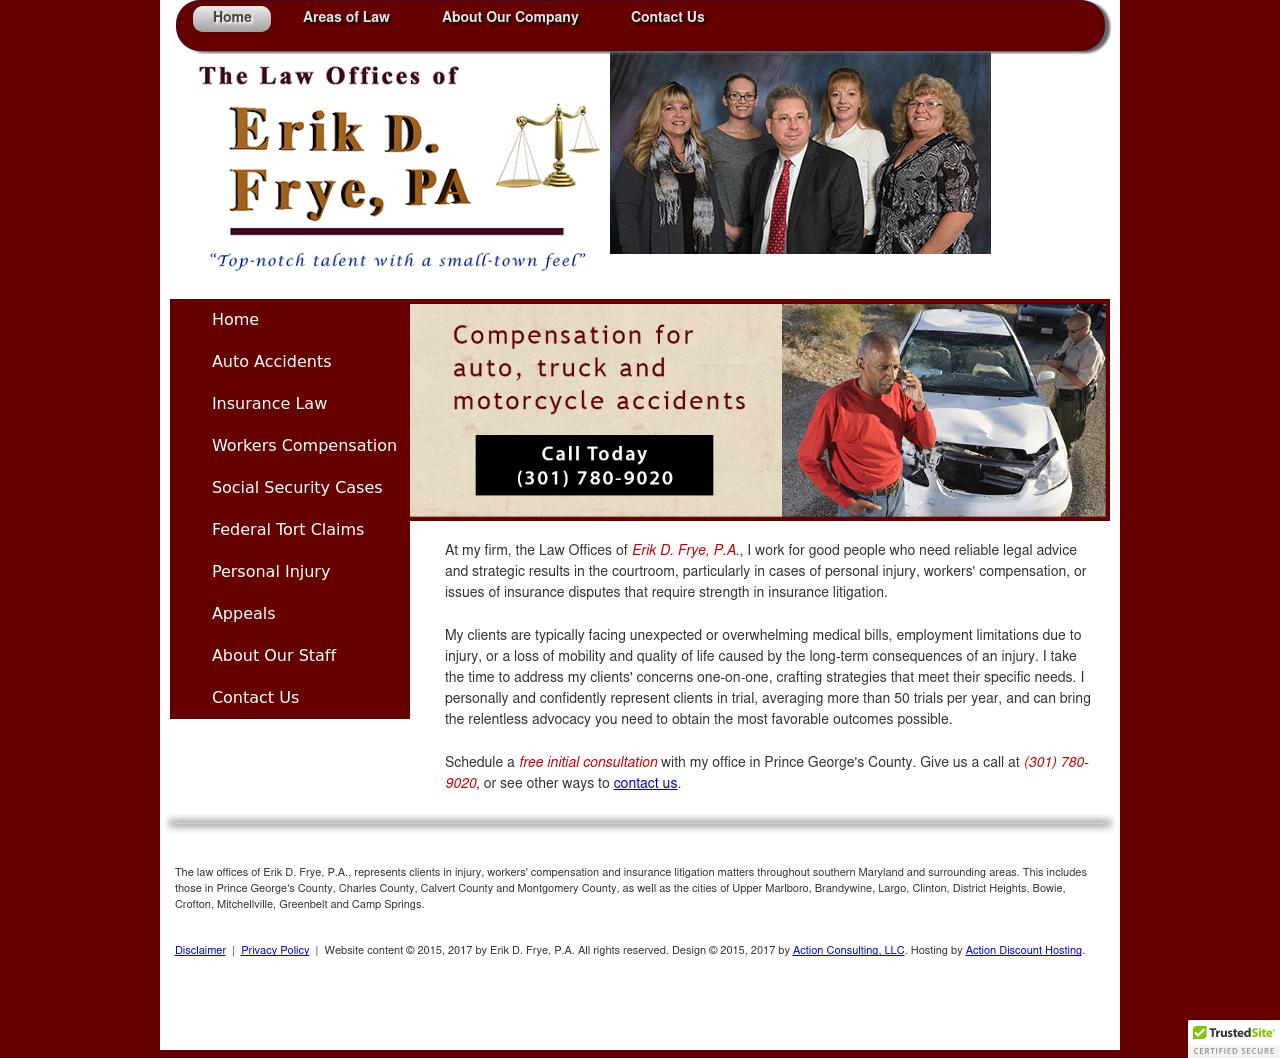 The Law Offices of Erik D. Frye, P.A. - Upper Marlboro MD Lawyers